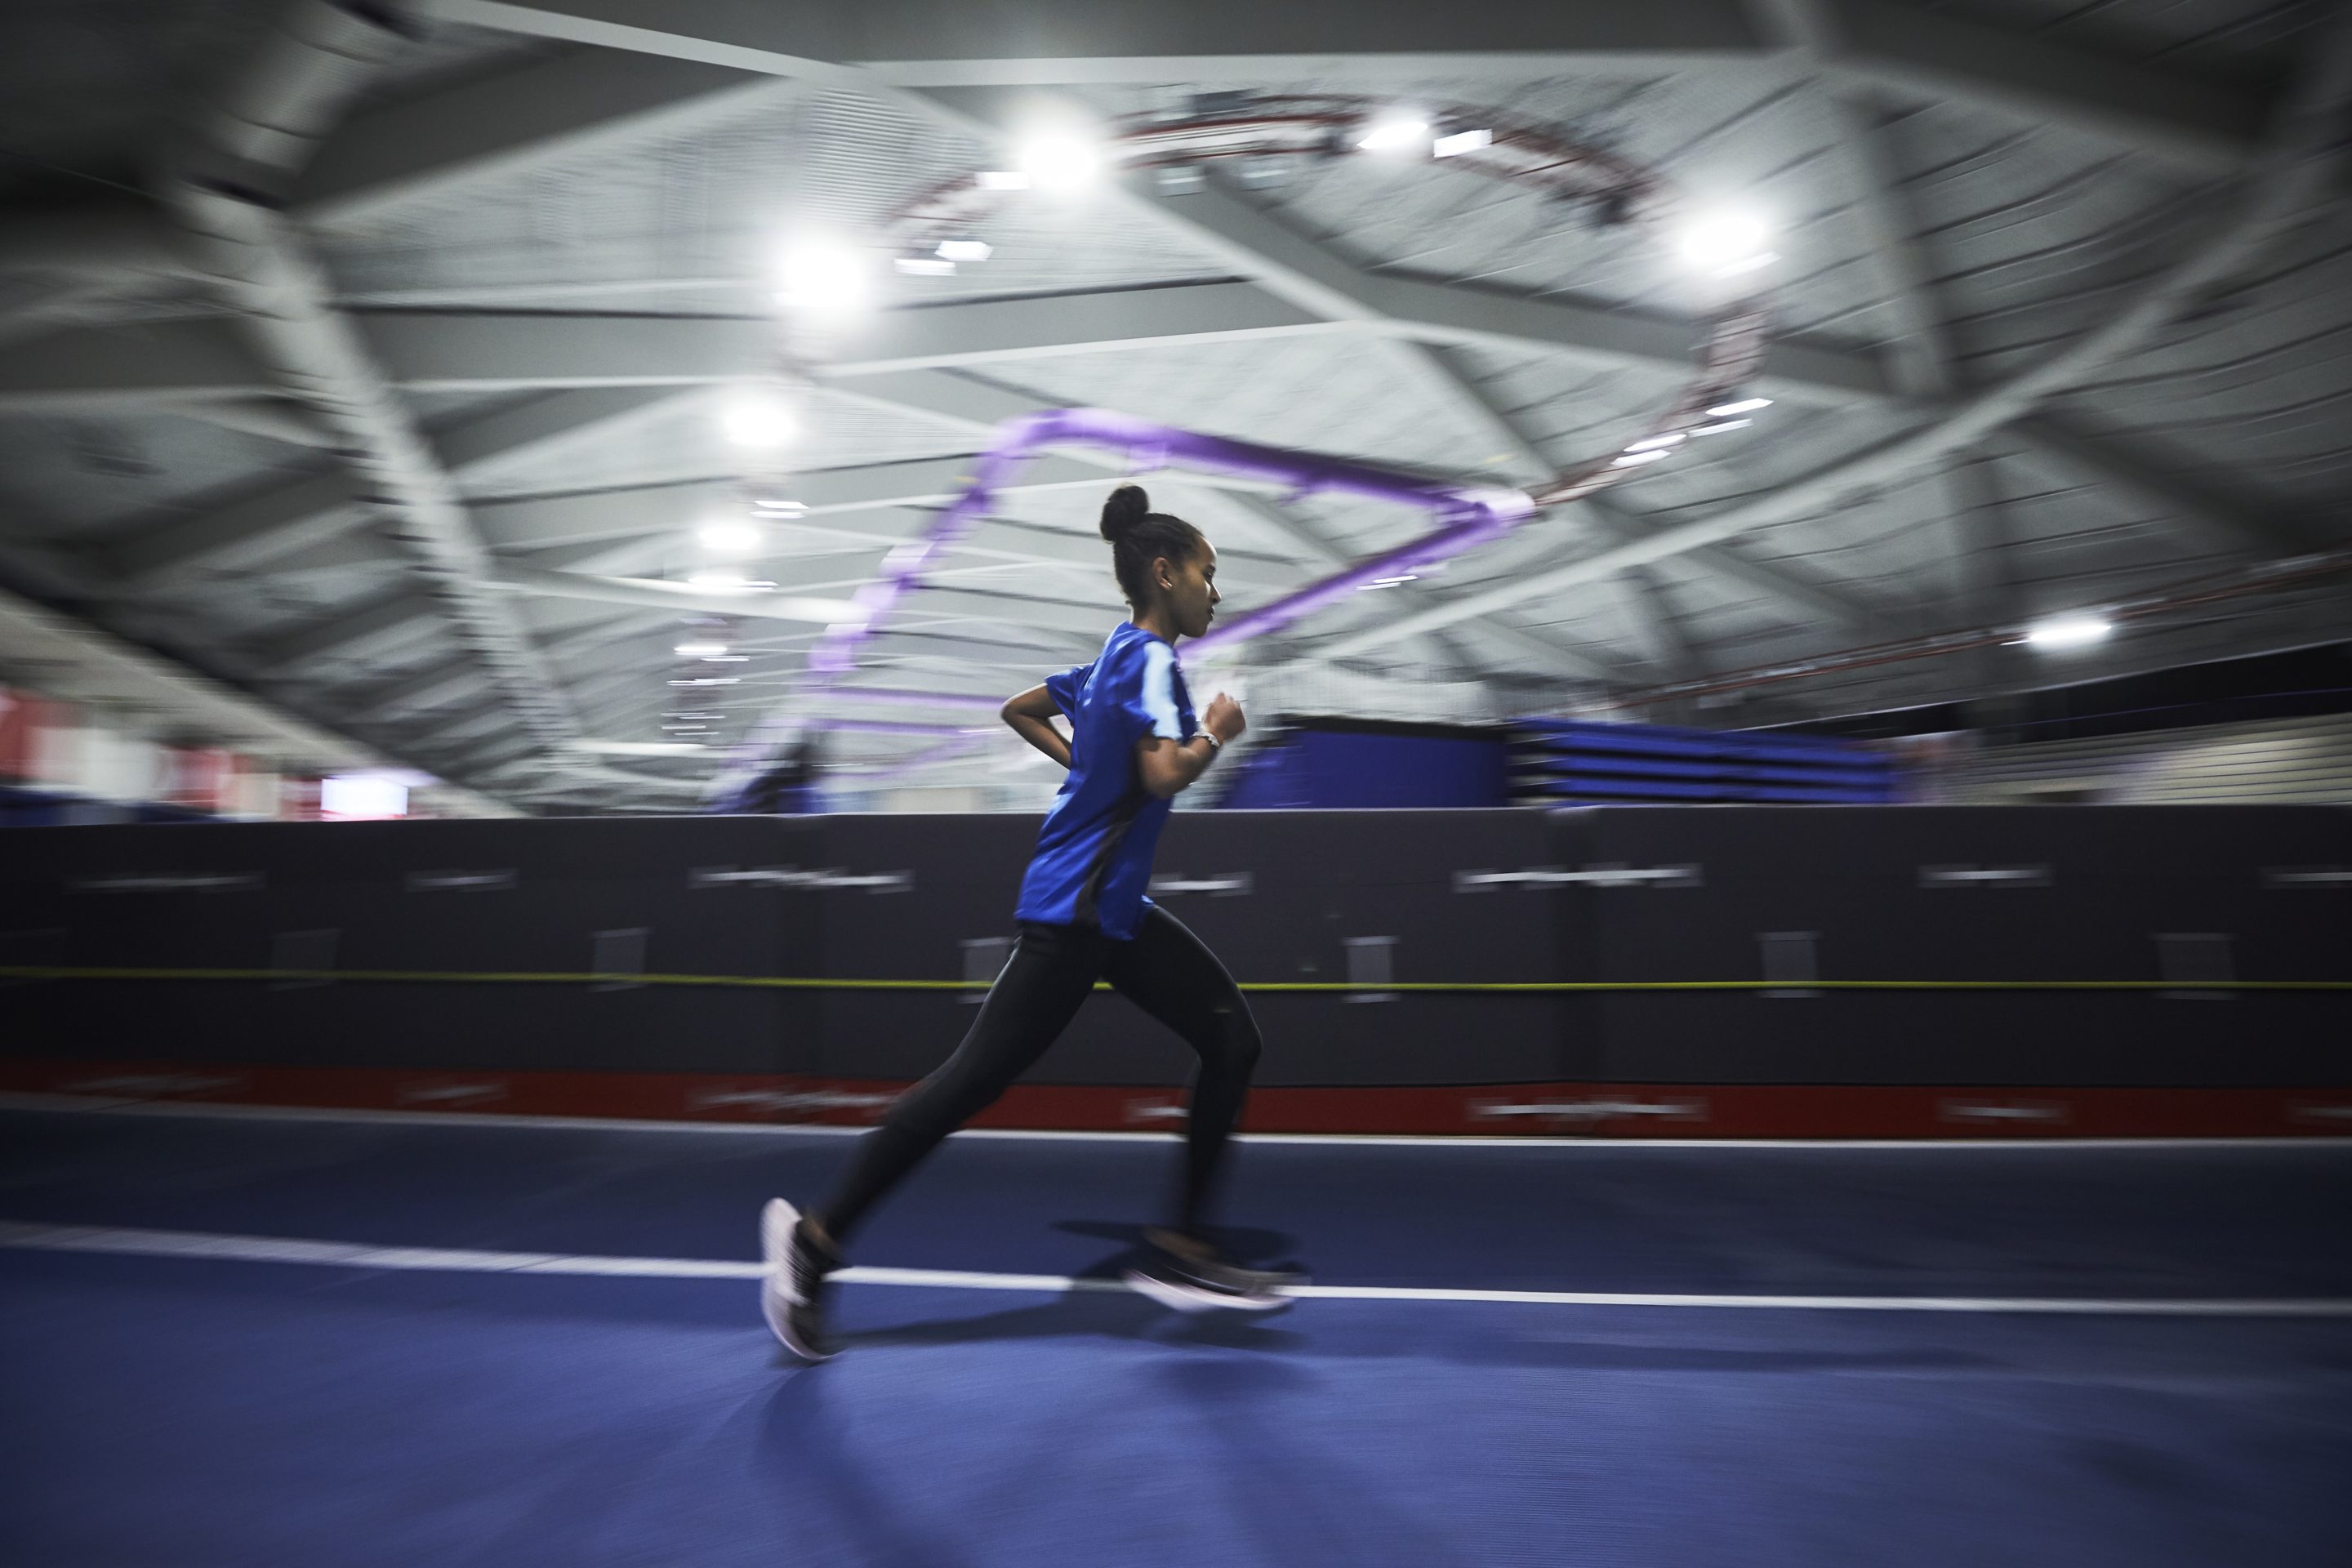 A young woman runs on an indoor track